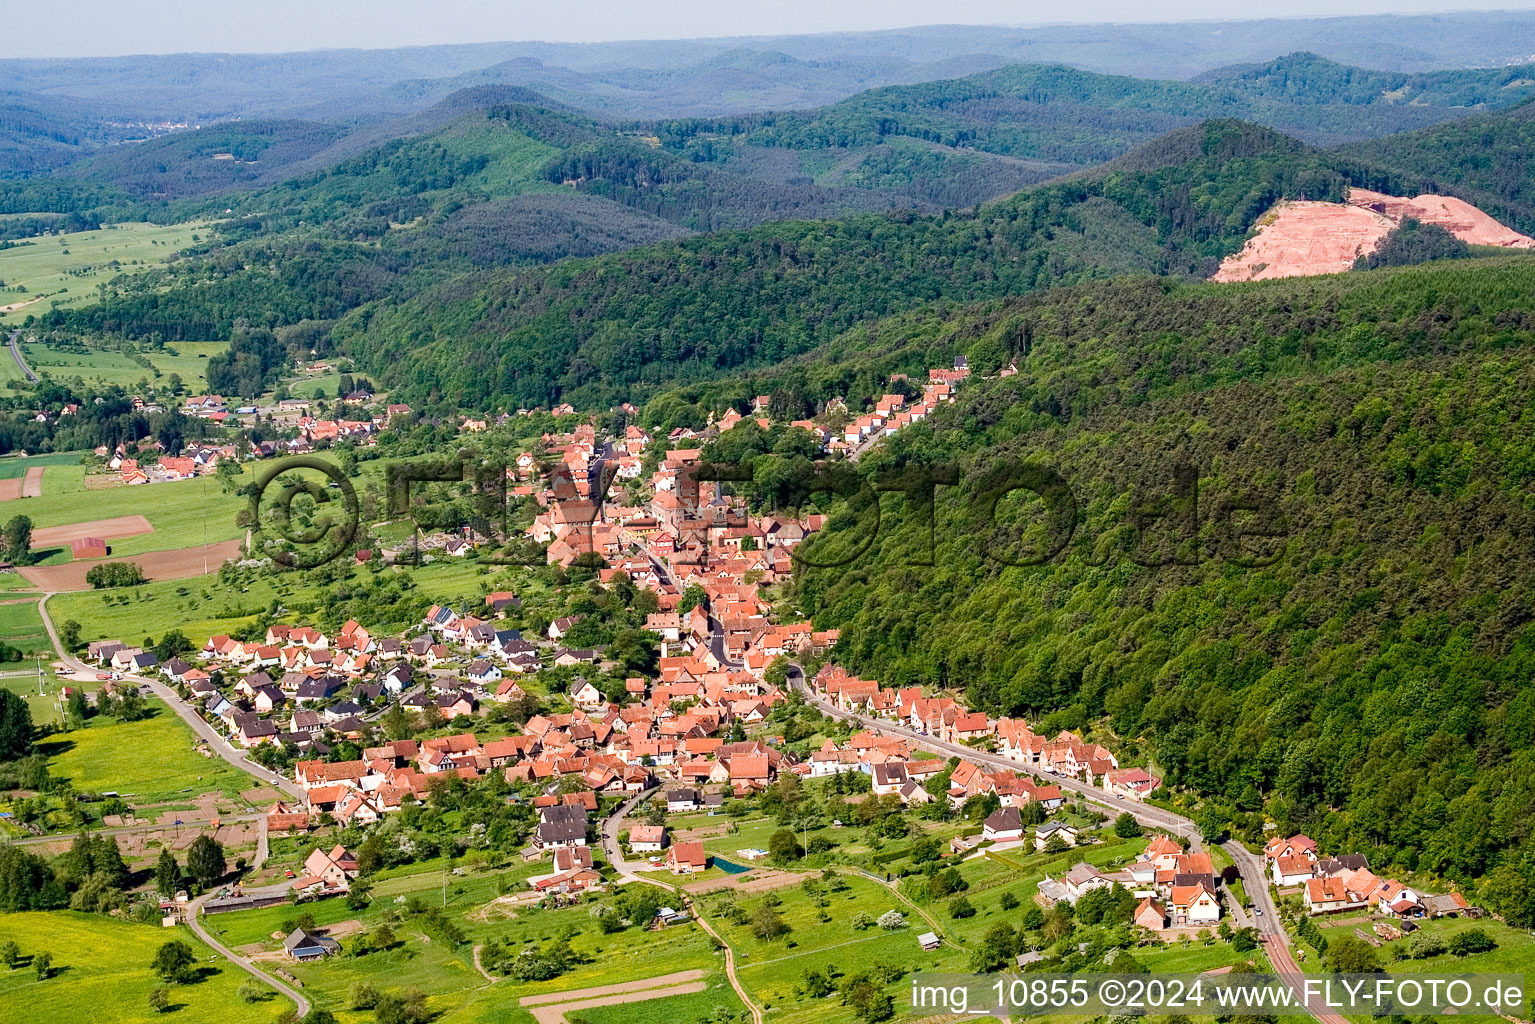 Aerial view of Forest and mountain scenery in Offwiller in Grand Est, France